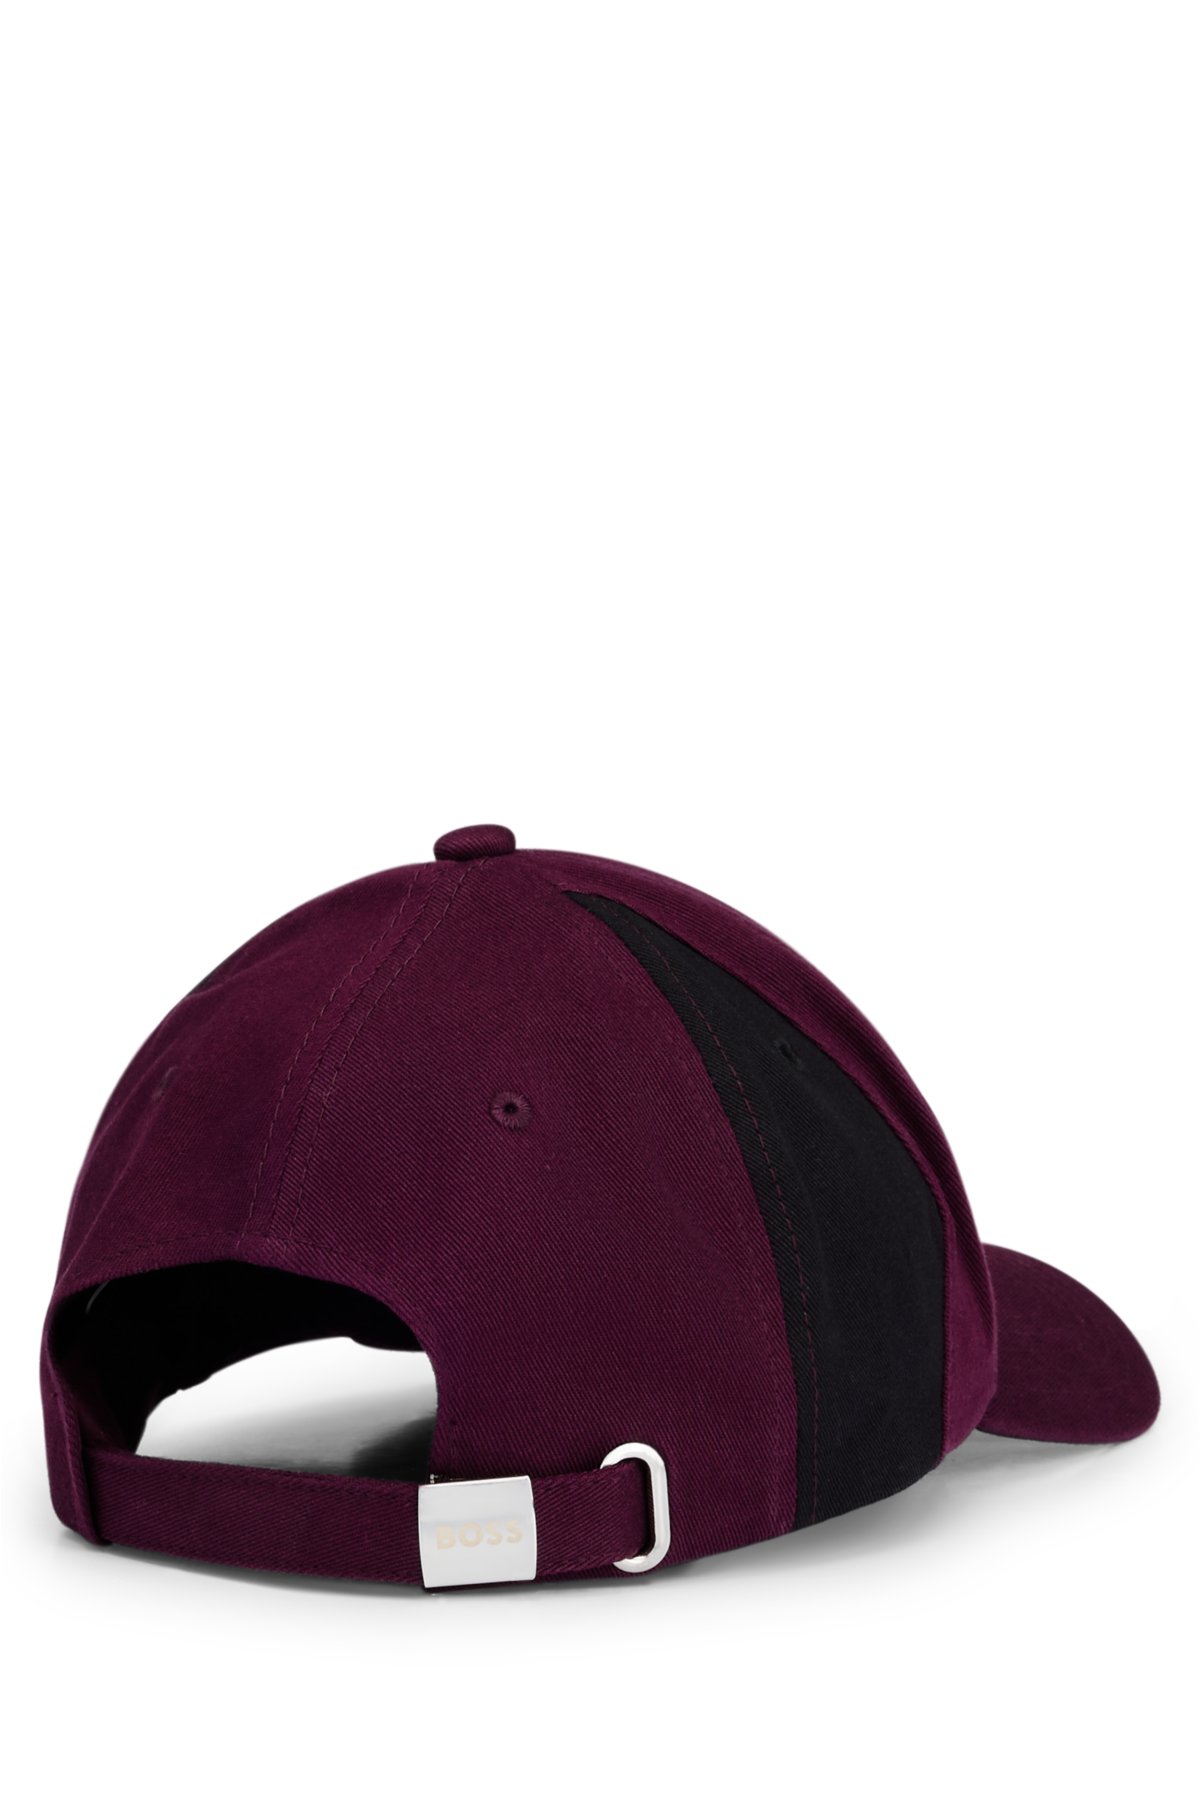 Buy Nike's Twill Dad Hat in Pink Light Mauve